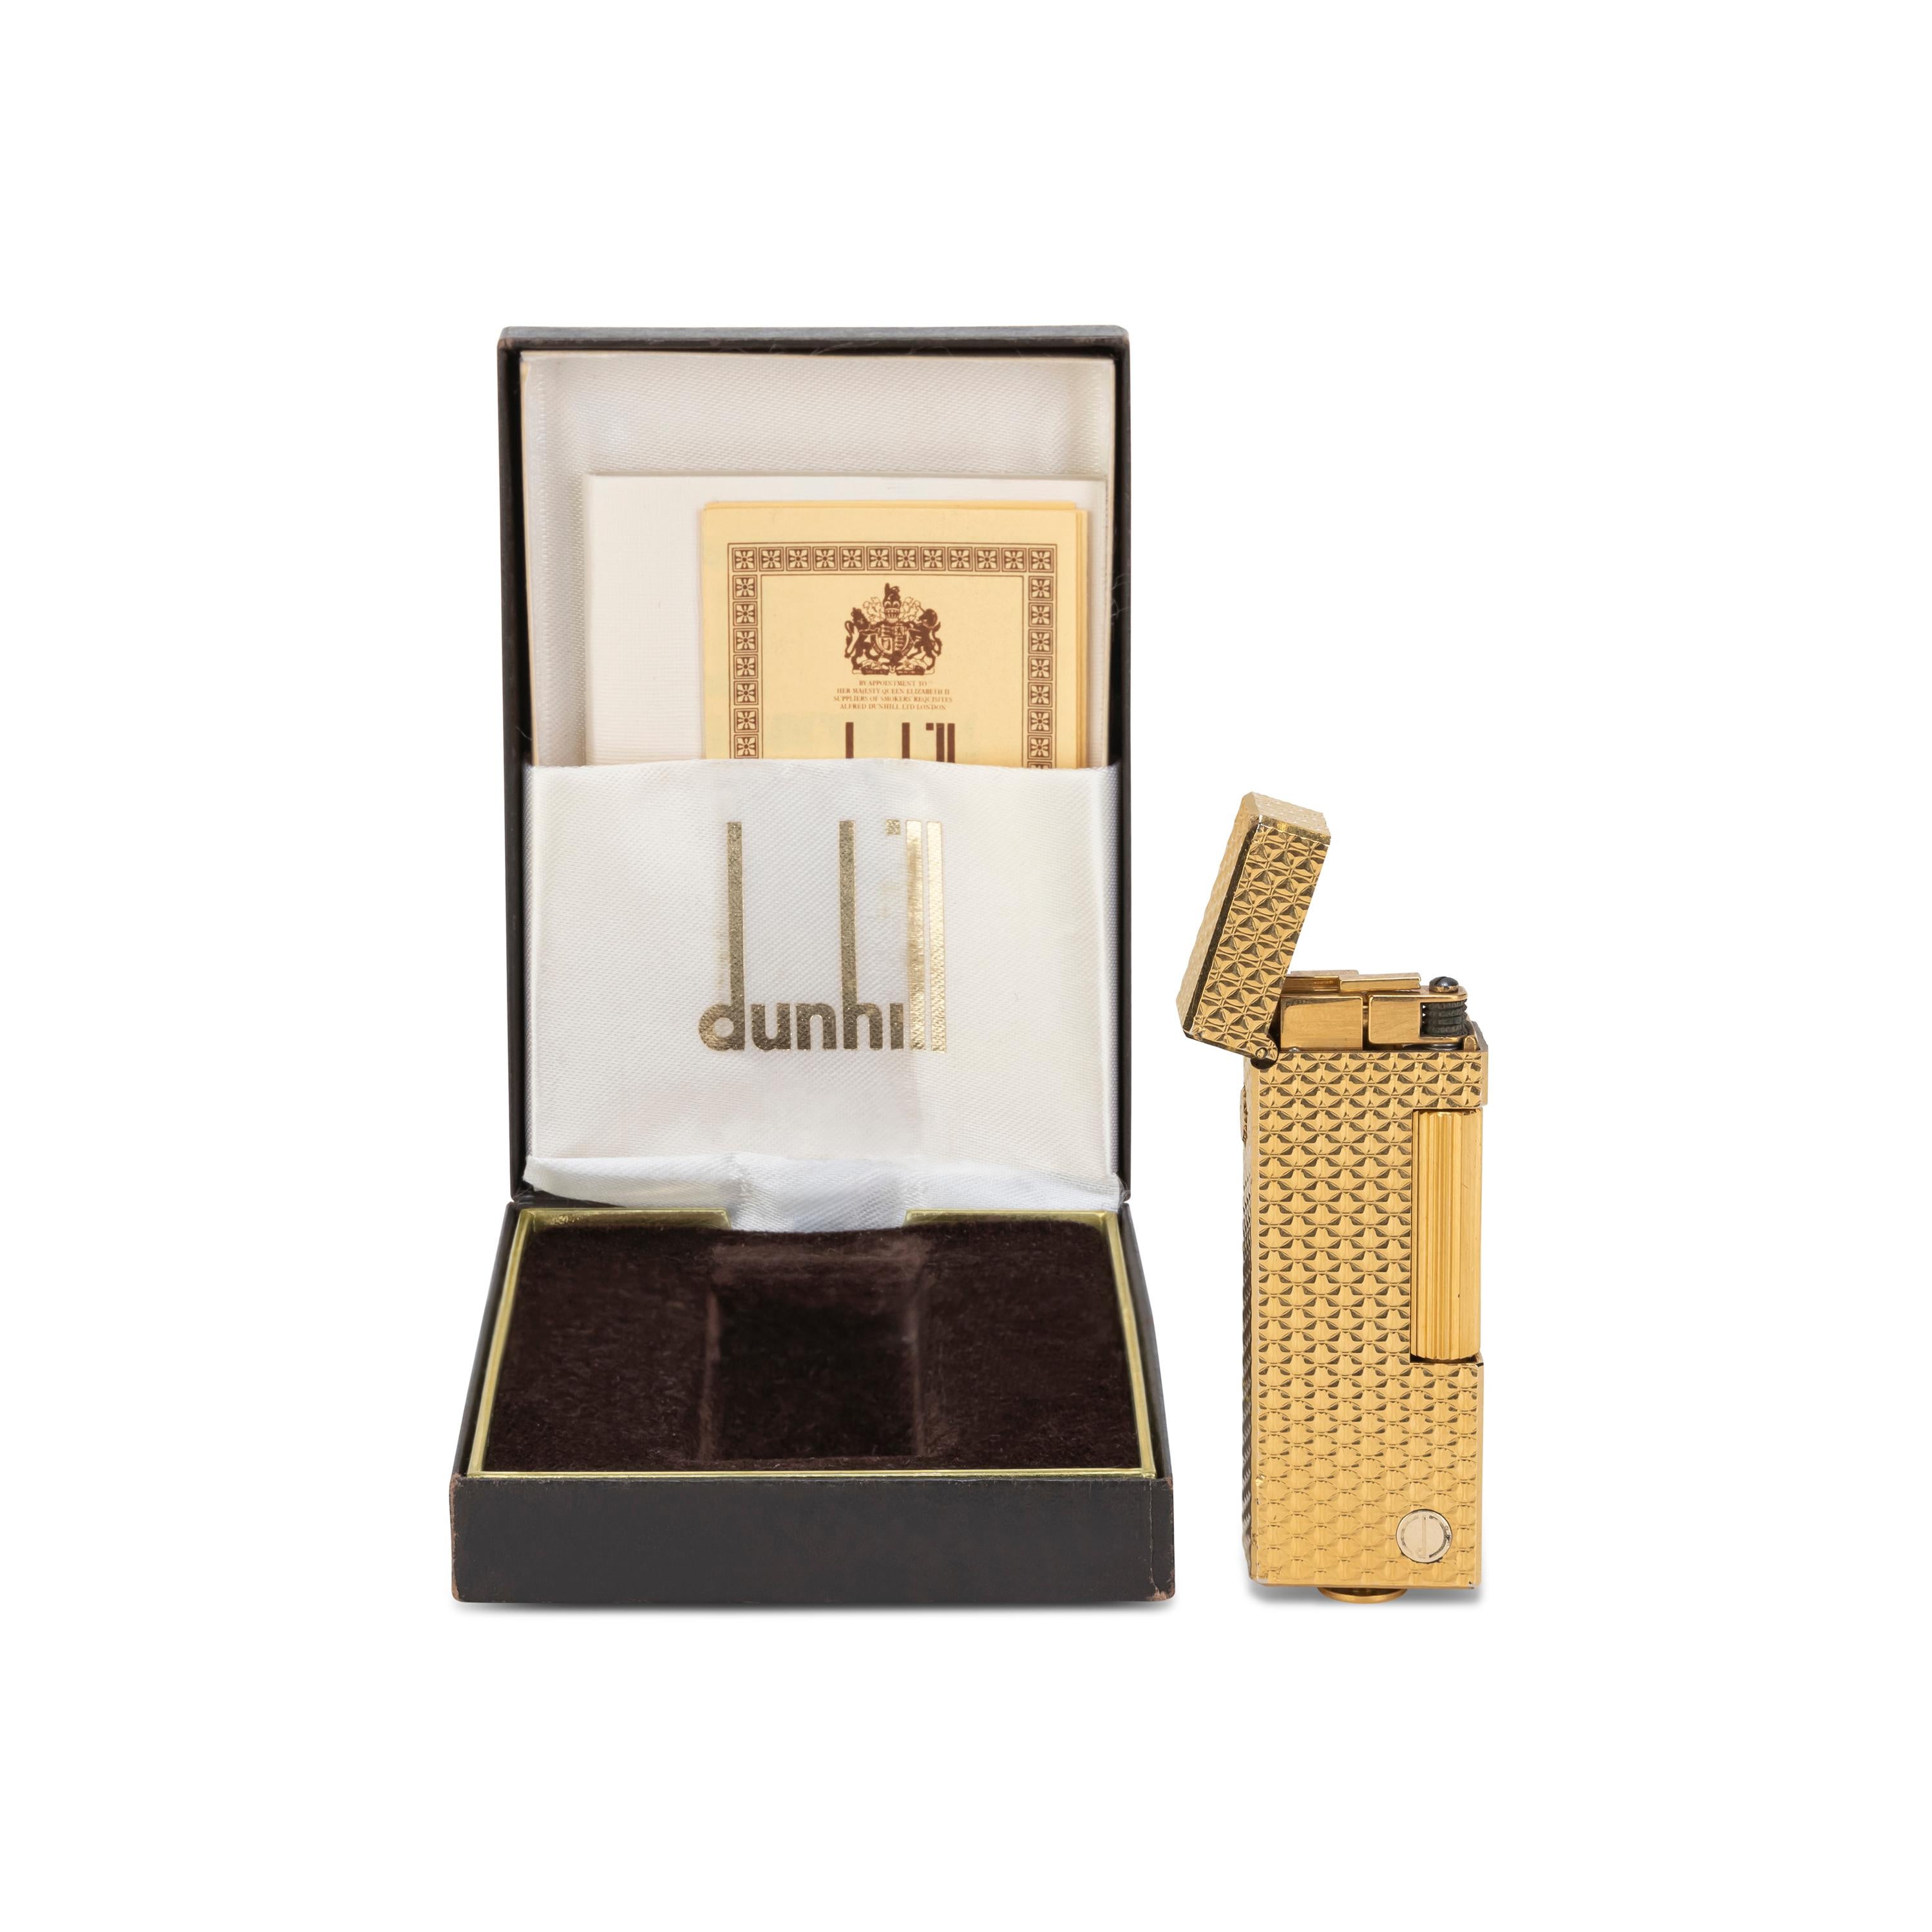 Rare, Iconic, chic and Elegant Dunhill Gold Plated Swiss Made Lighter.
Seen in the “James Bond” films. 
In mint condition. 
Works perfectly. 
Iconic and beautifully engineered piece in rare condition.
In original dunhill Black box and Brown velvet